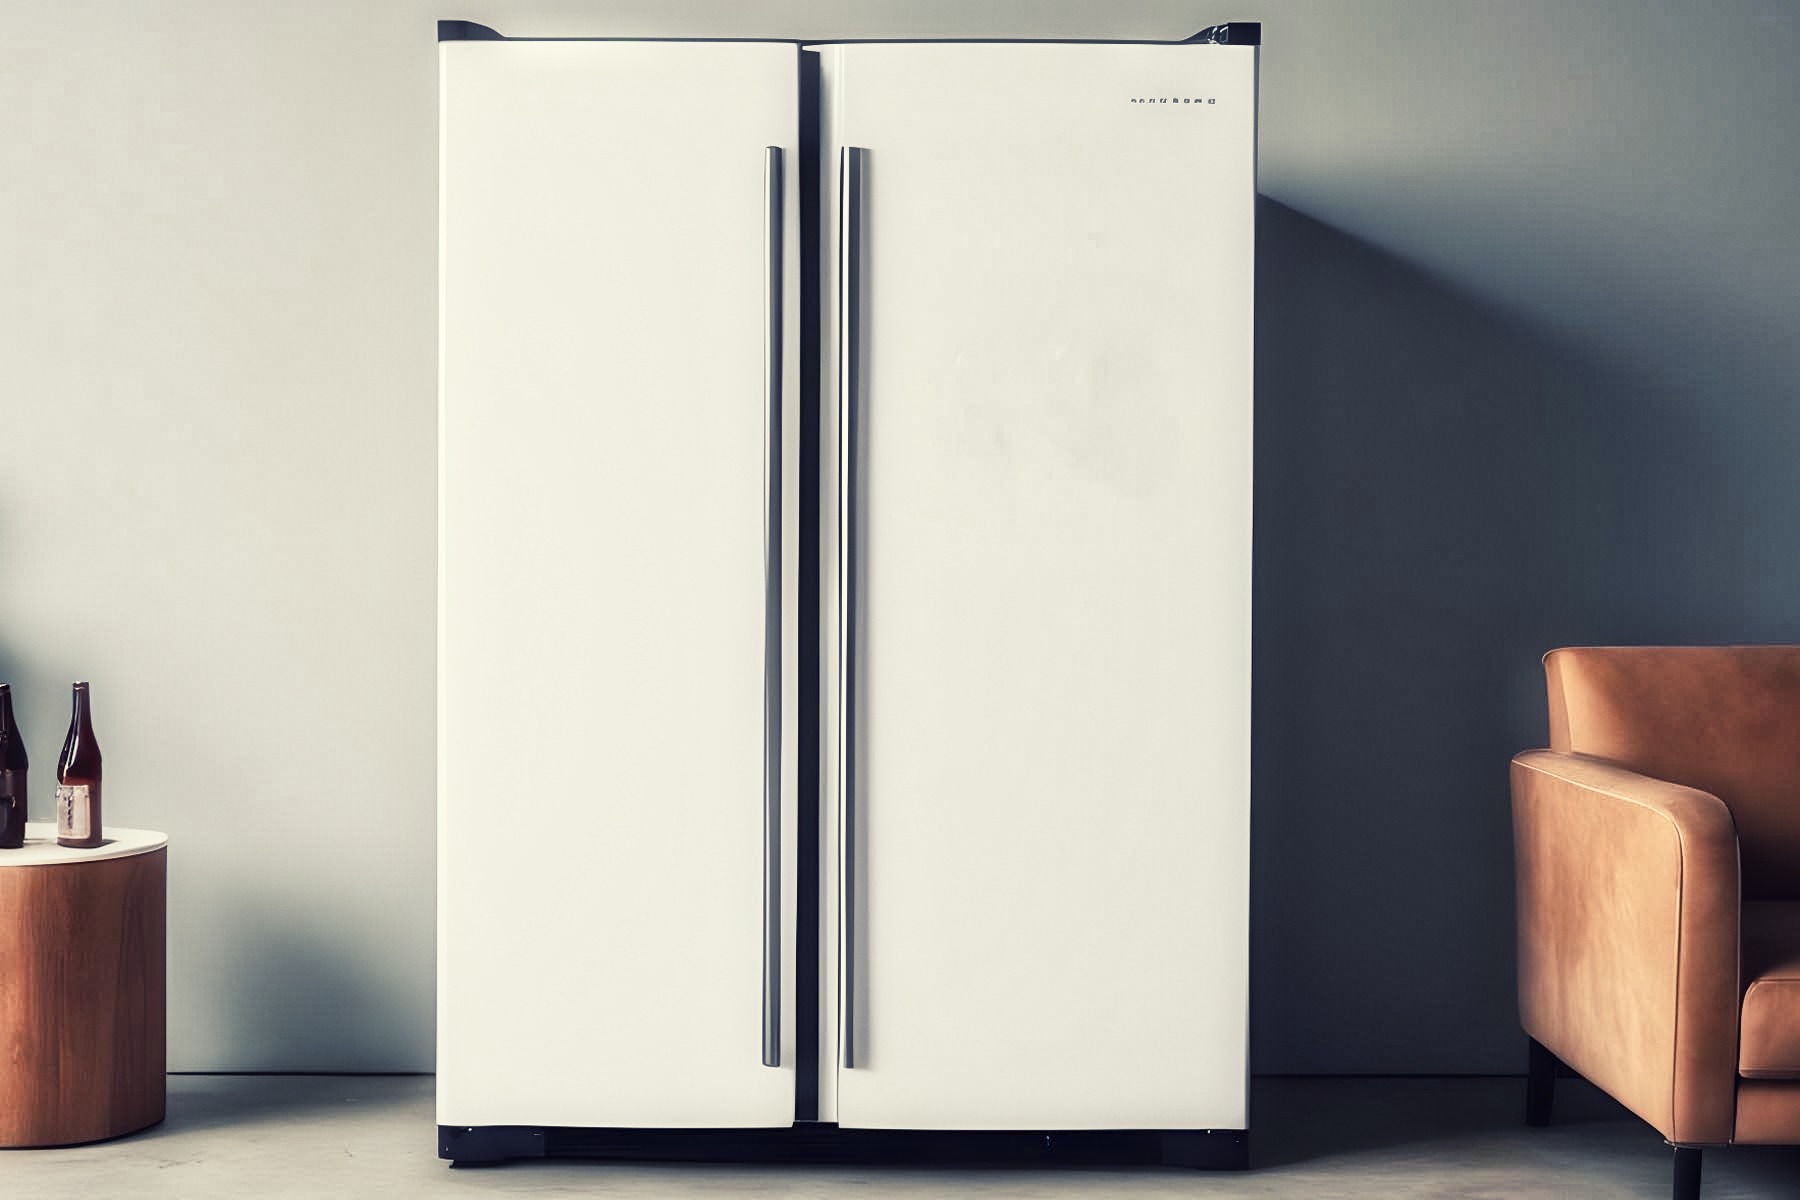 Commercial Refrigerator Maintenance for Austin, TX Festivals and Events.